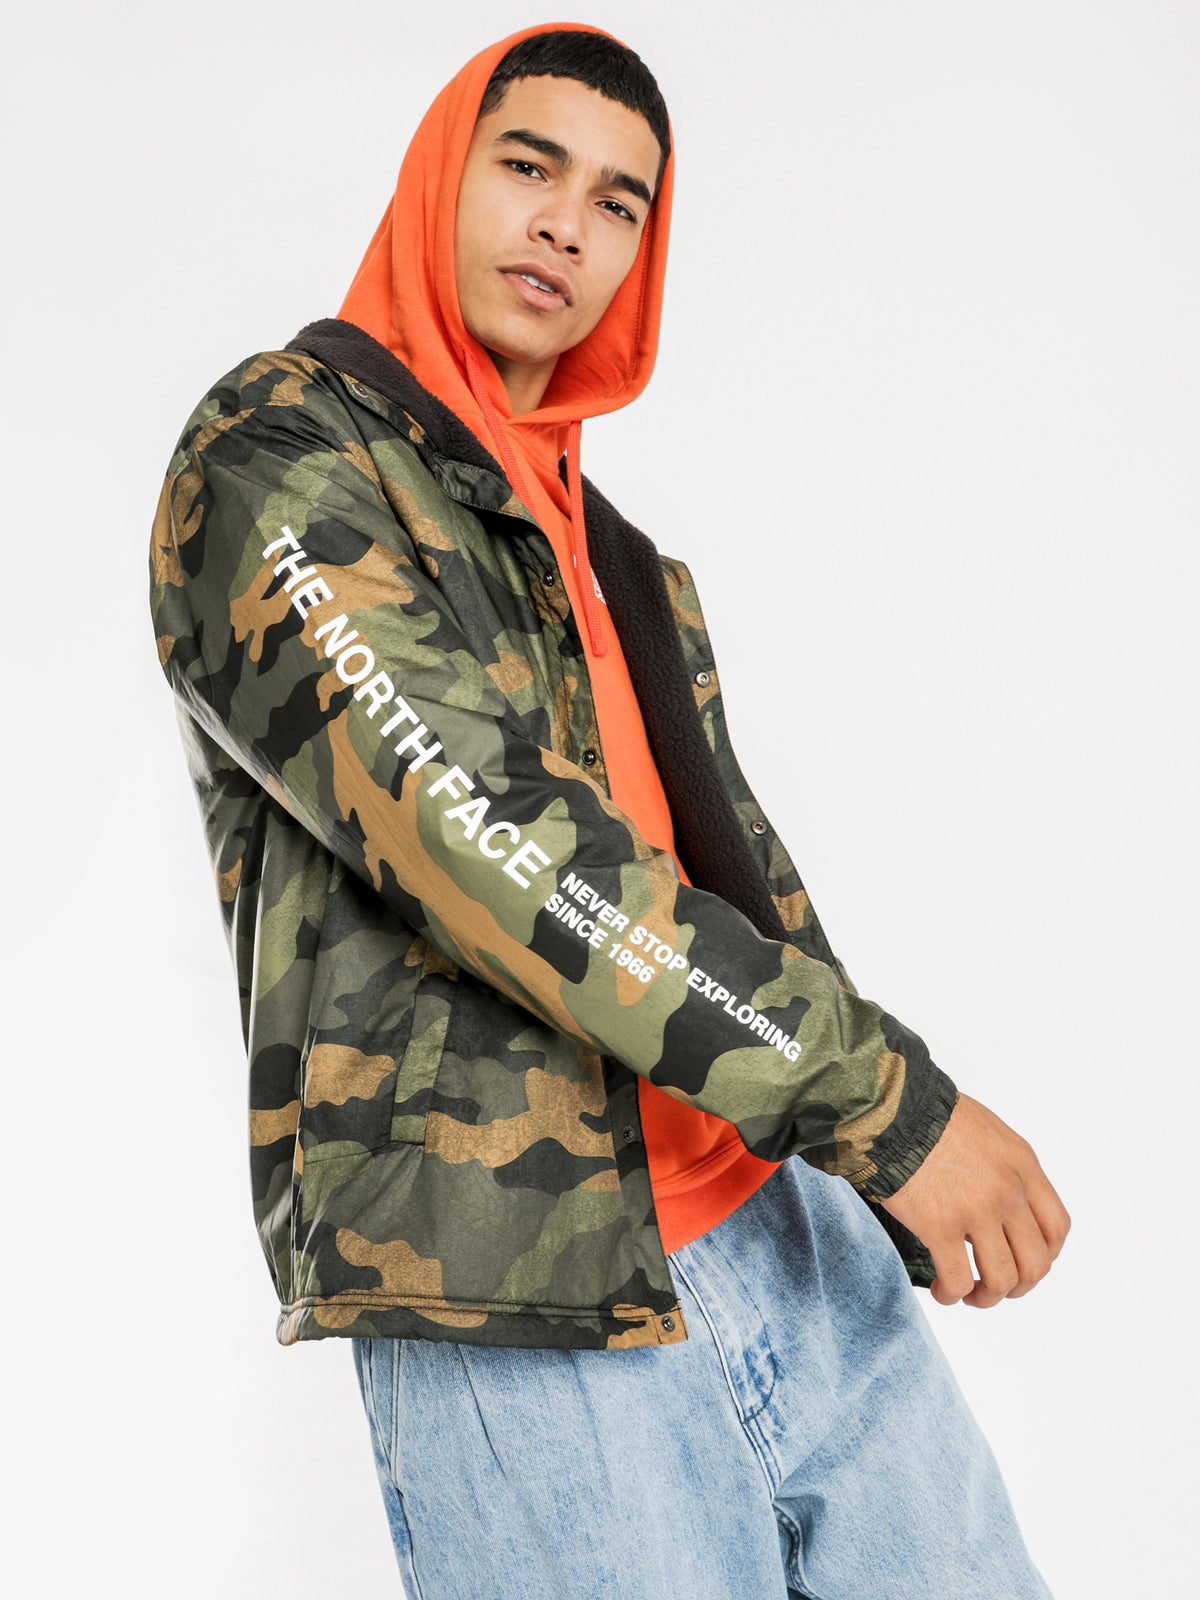 Telegraphic Coaches Jacket in Camouflage